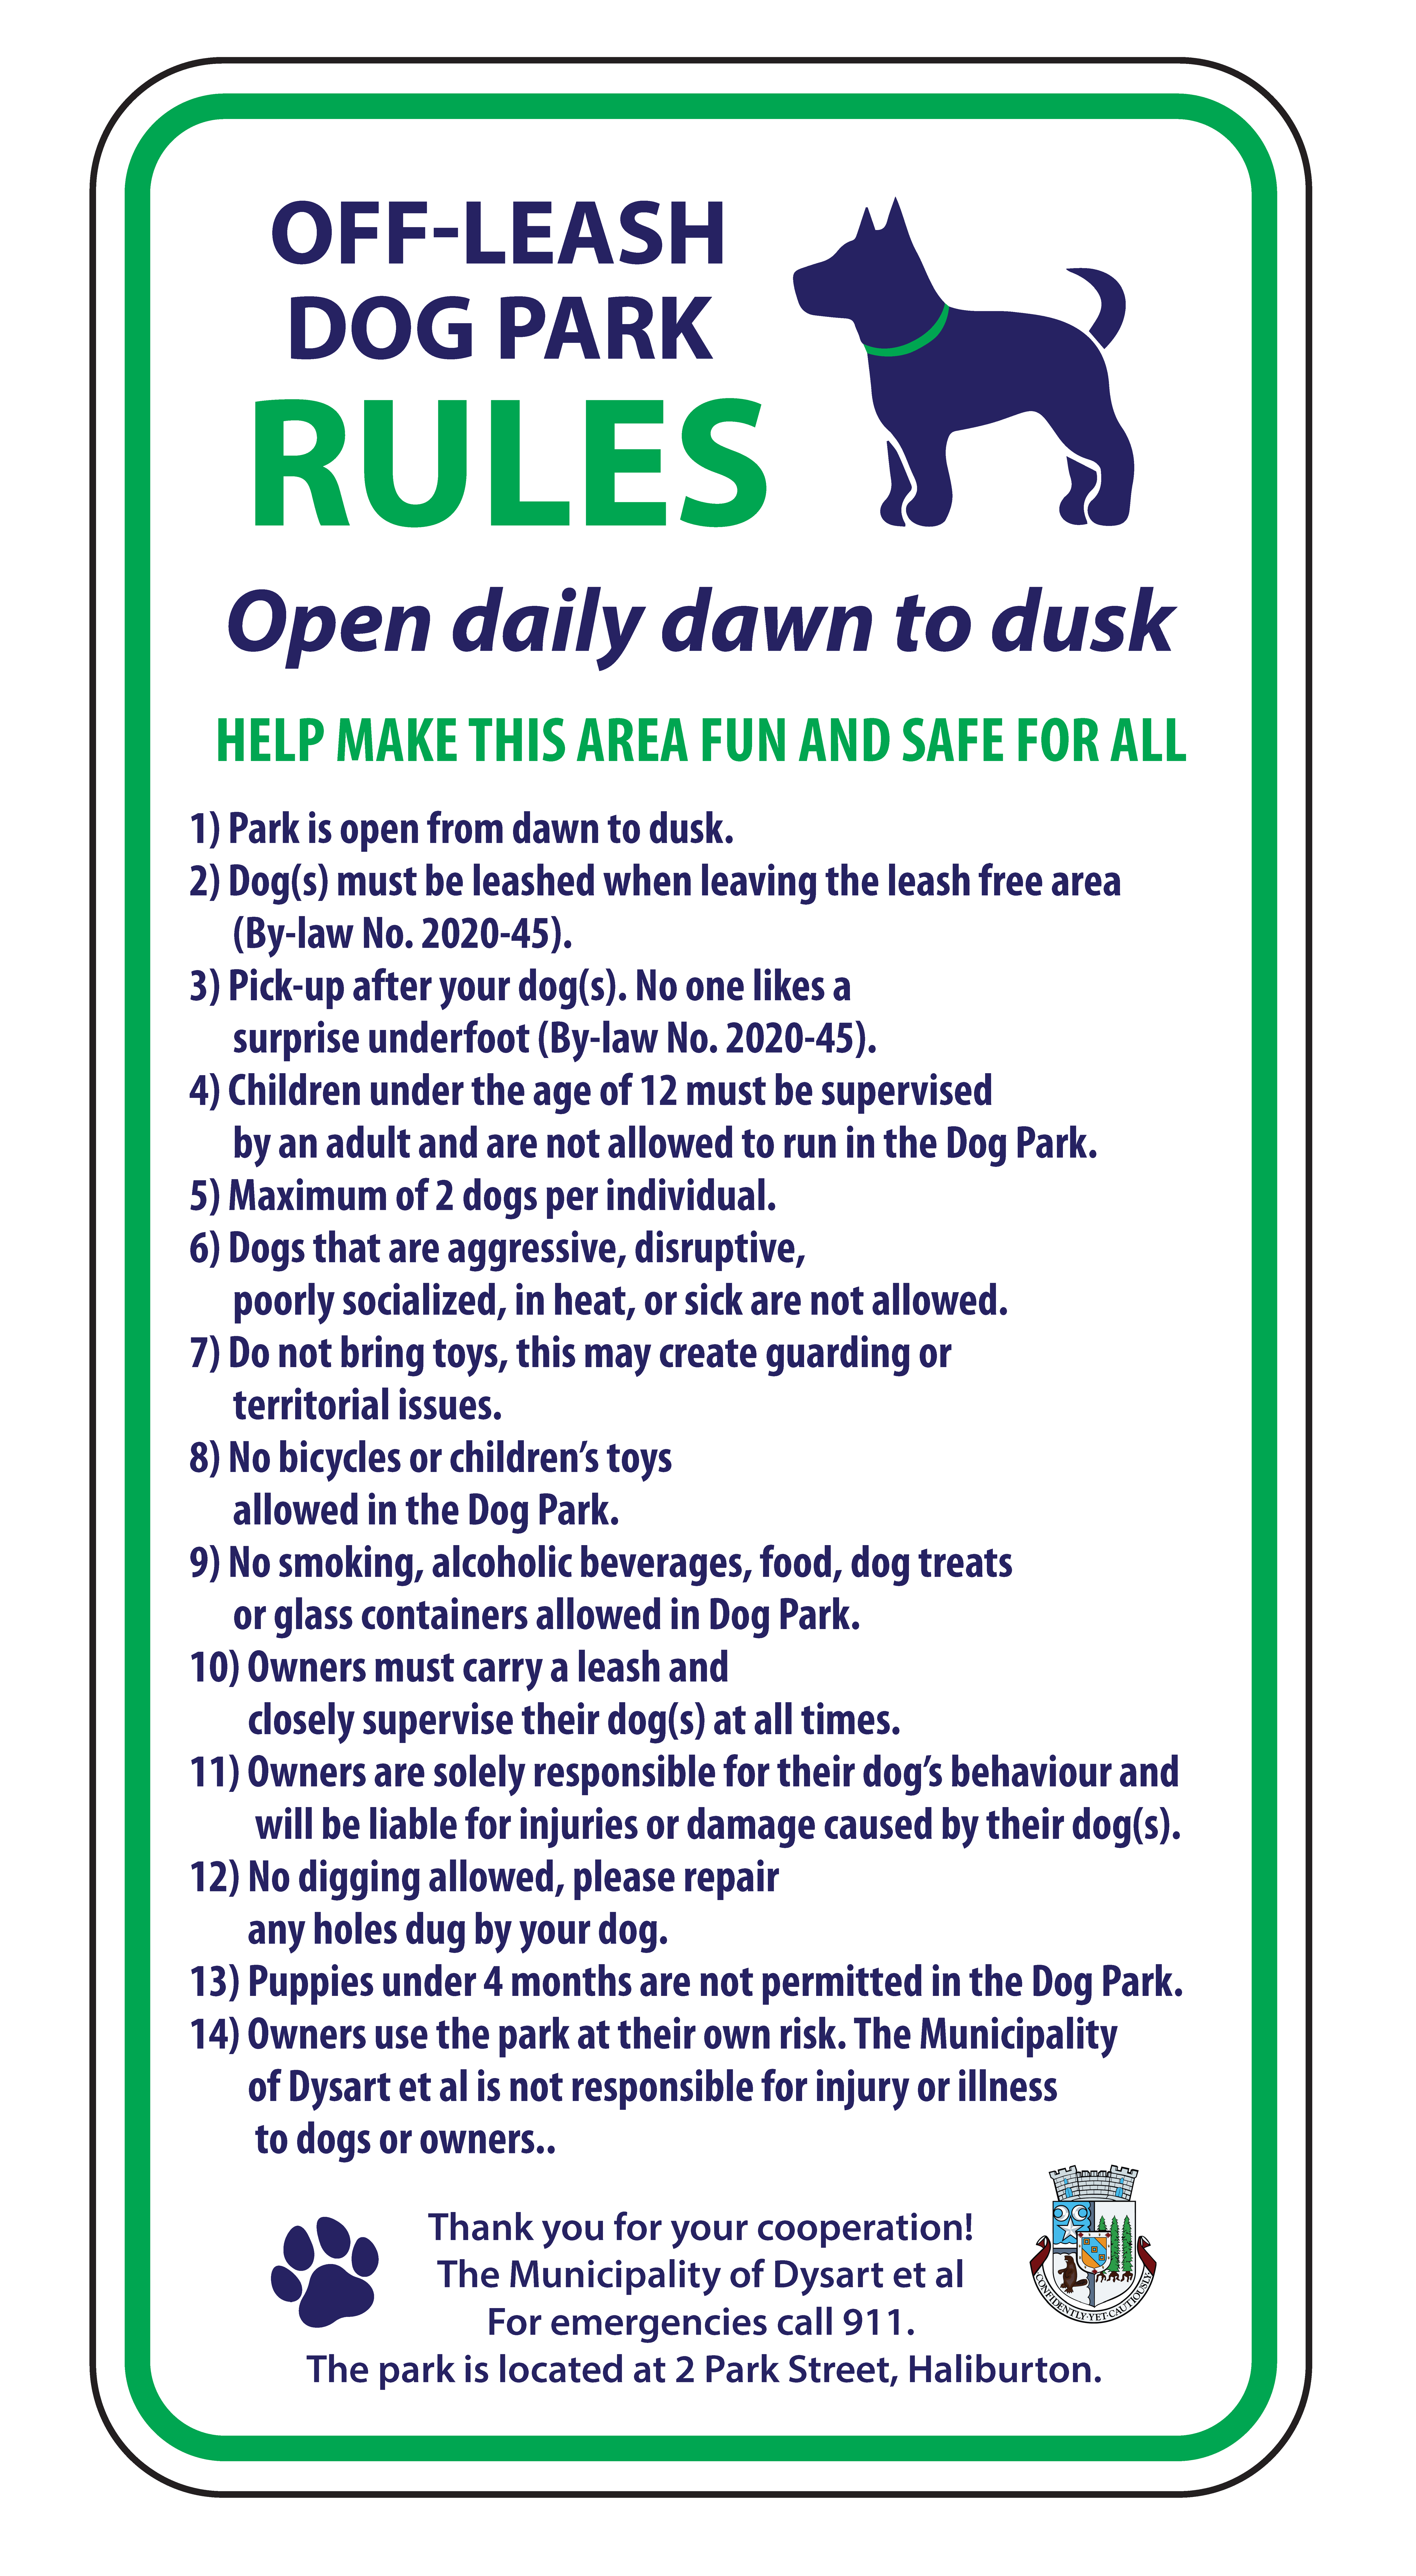 Off-leash Dog Park Rules Open daily dawn to dusk HELP MAKE THIS AREA FUN AND SAFE FOR ALL 1) Park is open from dawn to dusk. 2) Dog(s) must be leashed when leaving the leash free area (By-law No. 2020-45). 3) Pick-up after your dog(s). No one likes a surprise underfoot (By-law No. 2020-45). 4) Children under the age of 12 must be supervised by an adult and are not allowed to run in the Dog Park. 5) Maximum of 2 dogs per individual. 6) Dogs that are aggressive, disruptive, poorly socialized, in heat, or sick are not allowed.  7) Do not bring toys, this may create guarding or territorial issues. 8) No bicycles or children’s toys allowed in the Dog Park. 9) No smoking, alcoholic beverages, food, dog treats or glass containers allowed in Dog Park. 10) Owners must carry a leash and closely supervise their dog(s) at all times. 11) Owners are solely responsible for their dog’s behaviour and will be liable for injuries or damage caused by their dog(s). 12) No digging allowed, please repair any holes dug by your dog. 13) Puppies under 4 months are not permitted in the Dog Park. 14) Owners use the park at their own risk. The Municipality of Dysart et al is not responsible for injury or illness to dogs or owners.  Thank you for your cooperation! The Municipality of Dysart et al For emergencies call 911. The park is located at 2 Park Street, Haliburton.